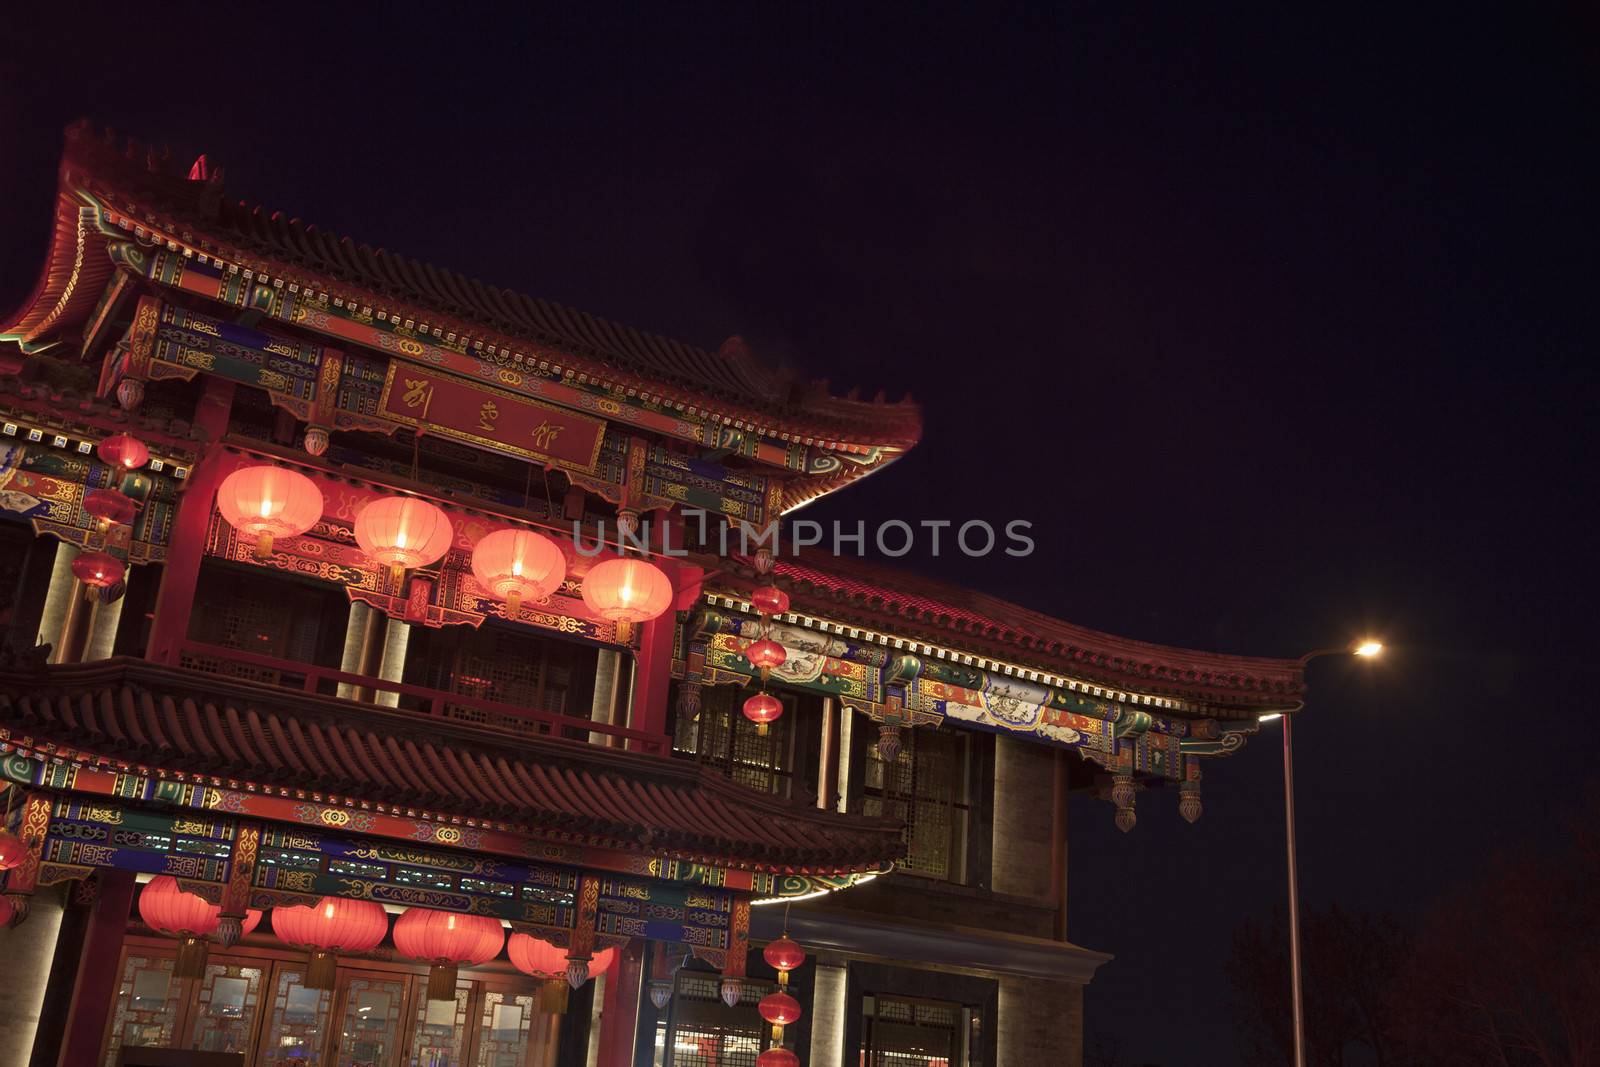 Traditional Chinese building illuminated at night in Beijing, China